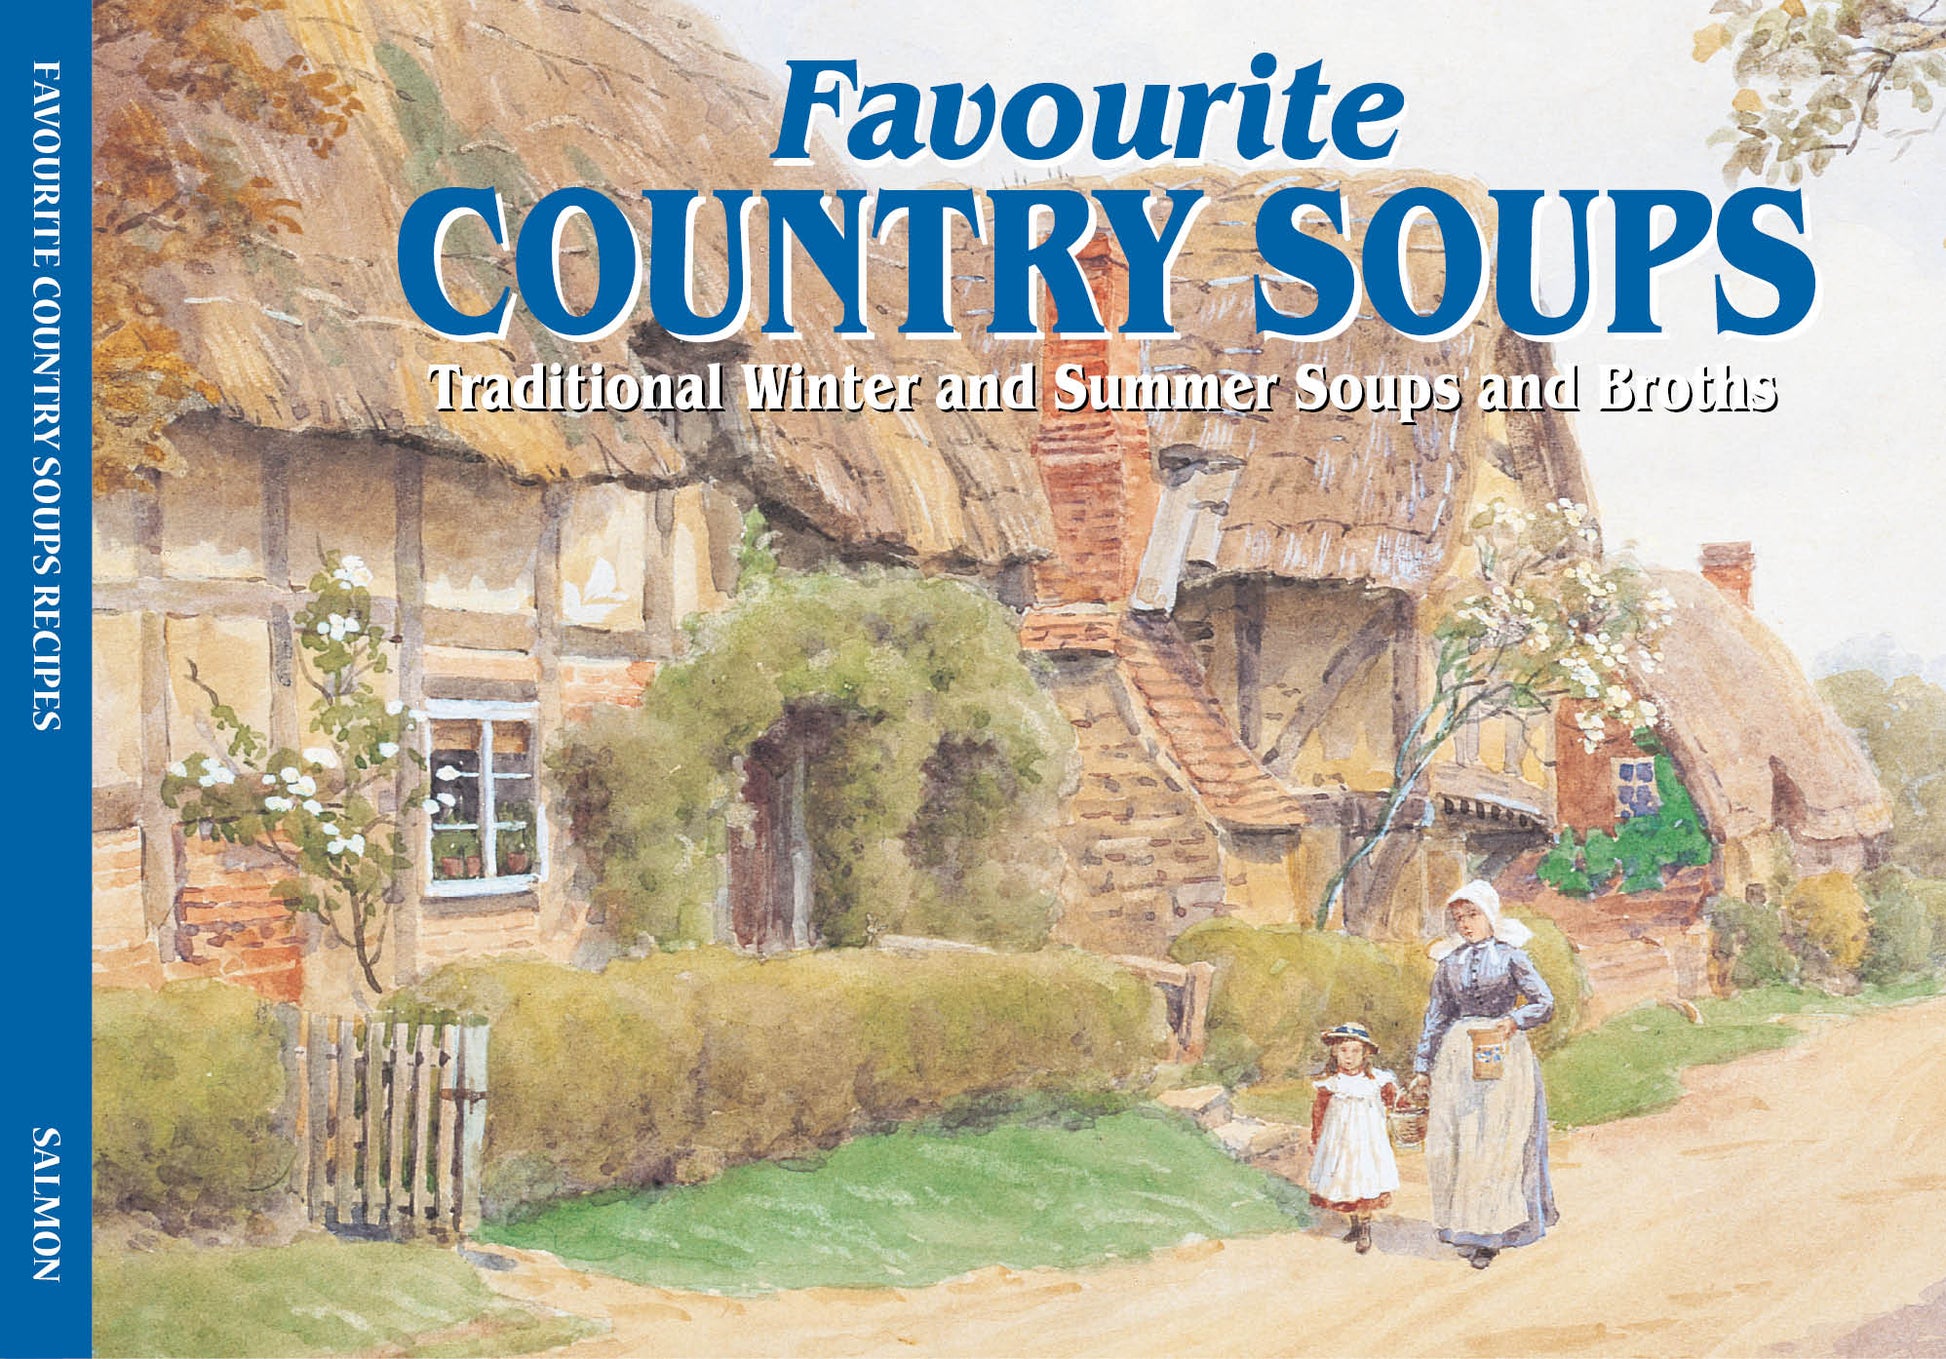 Favourite Country Soups Recipes Book